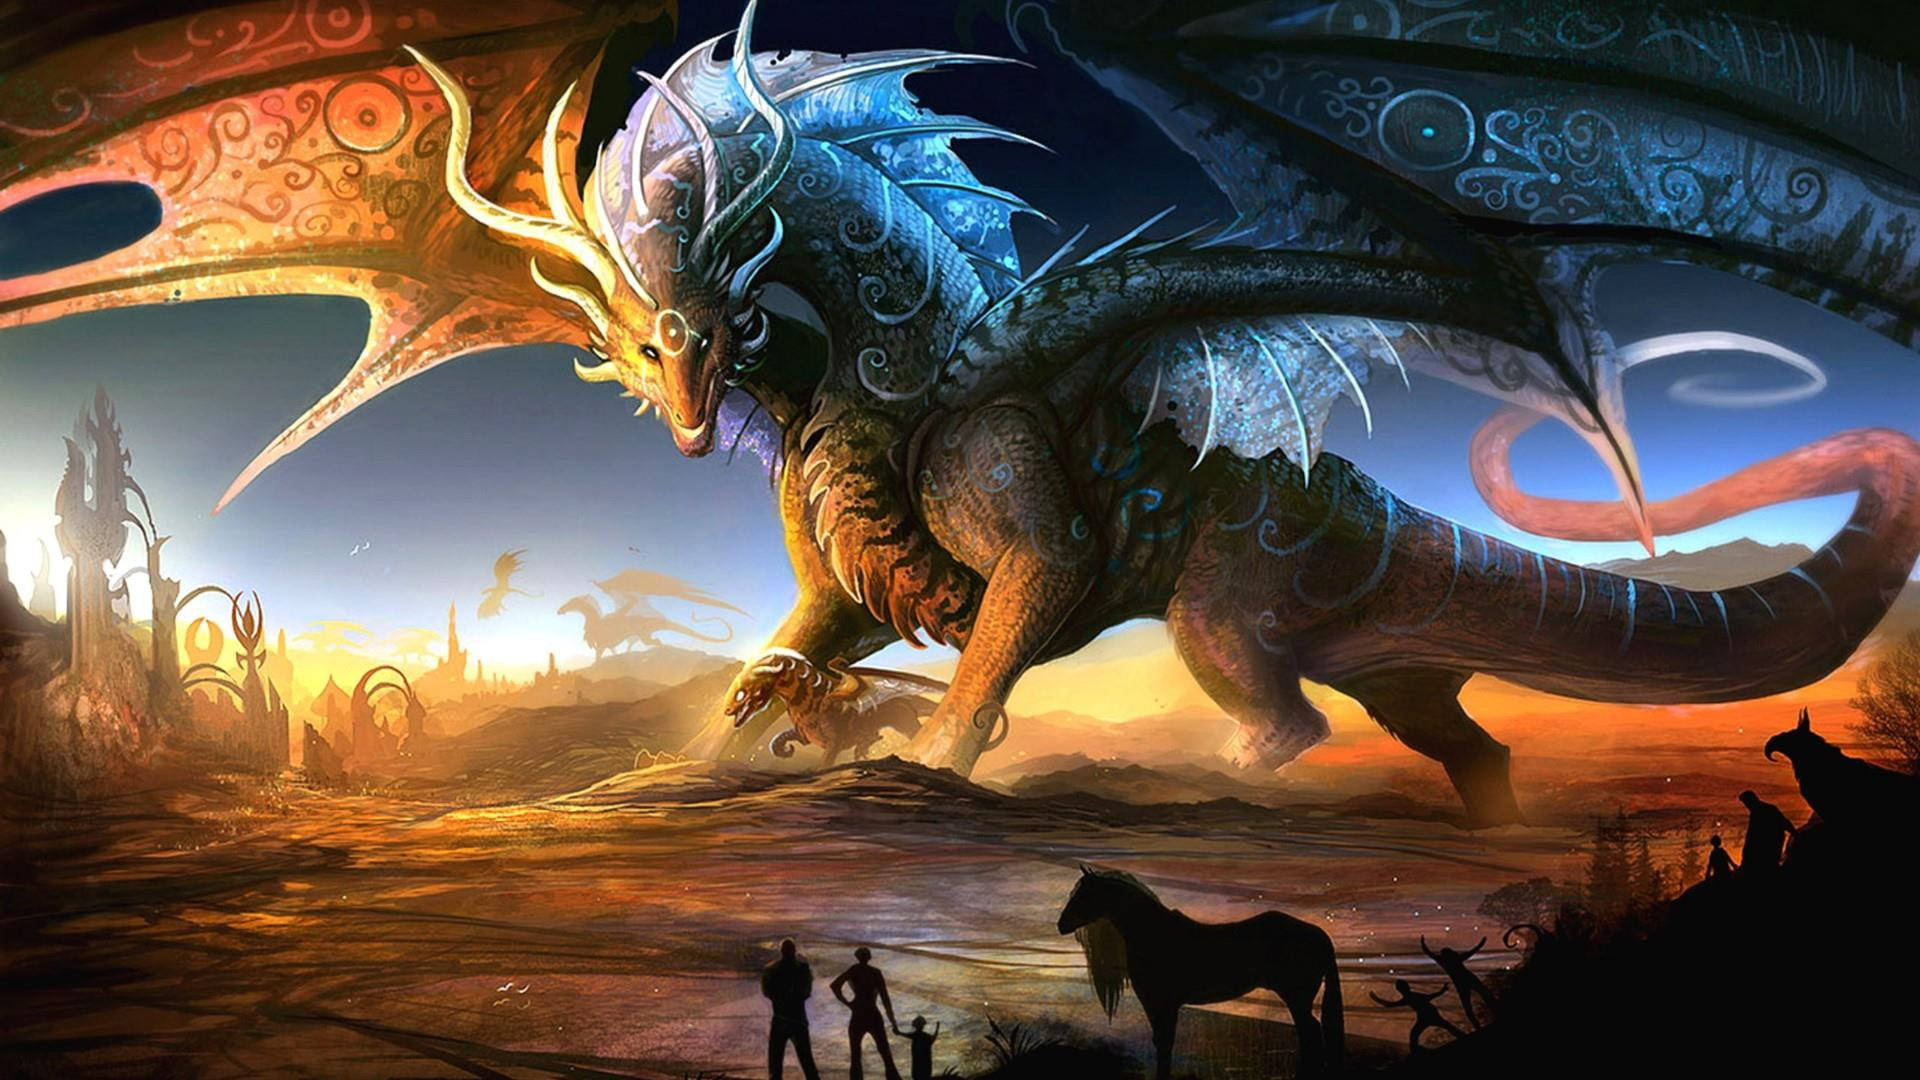 1920x1080 Download Orange Blue Dragons Mythical Creatures Wallpaper